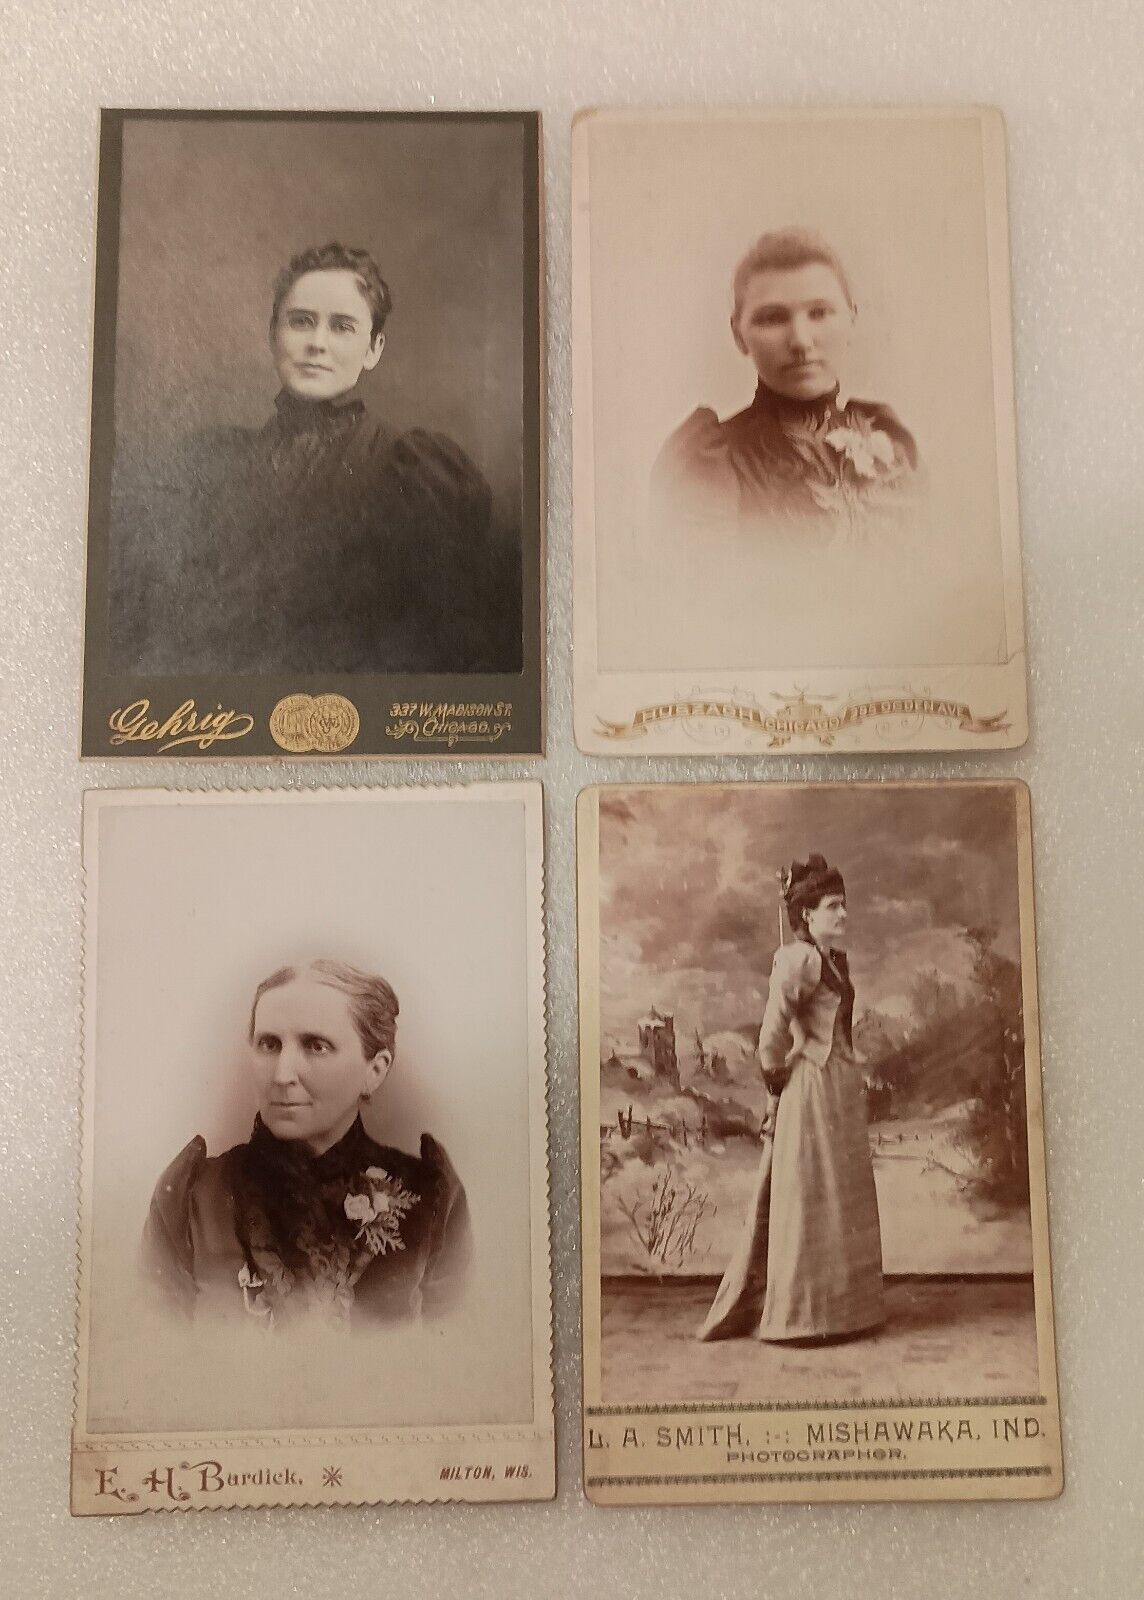 Lot Of 4 - Antique Photo Cabinet Cards Of Women Portraits 1800's Victorian Era